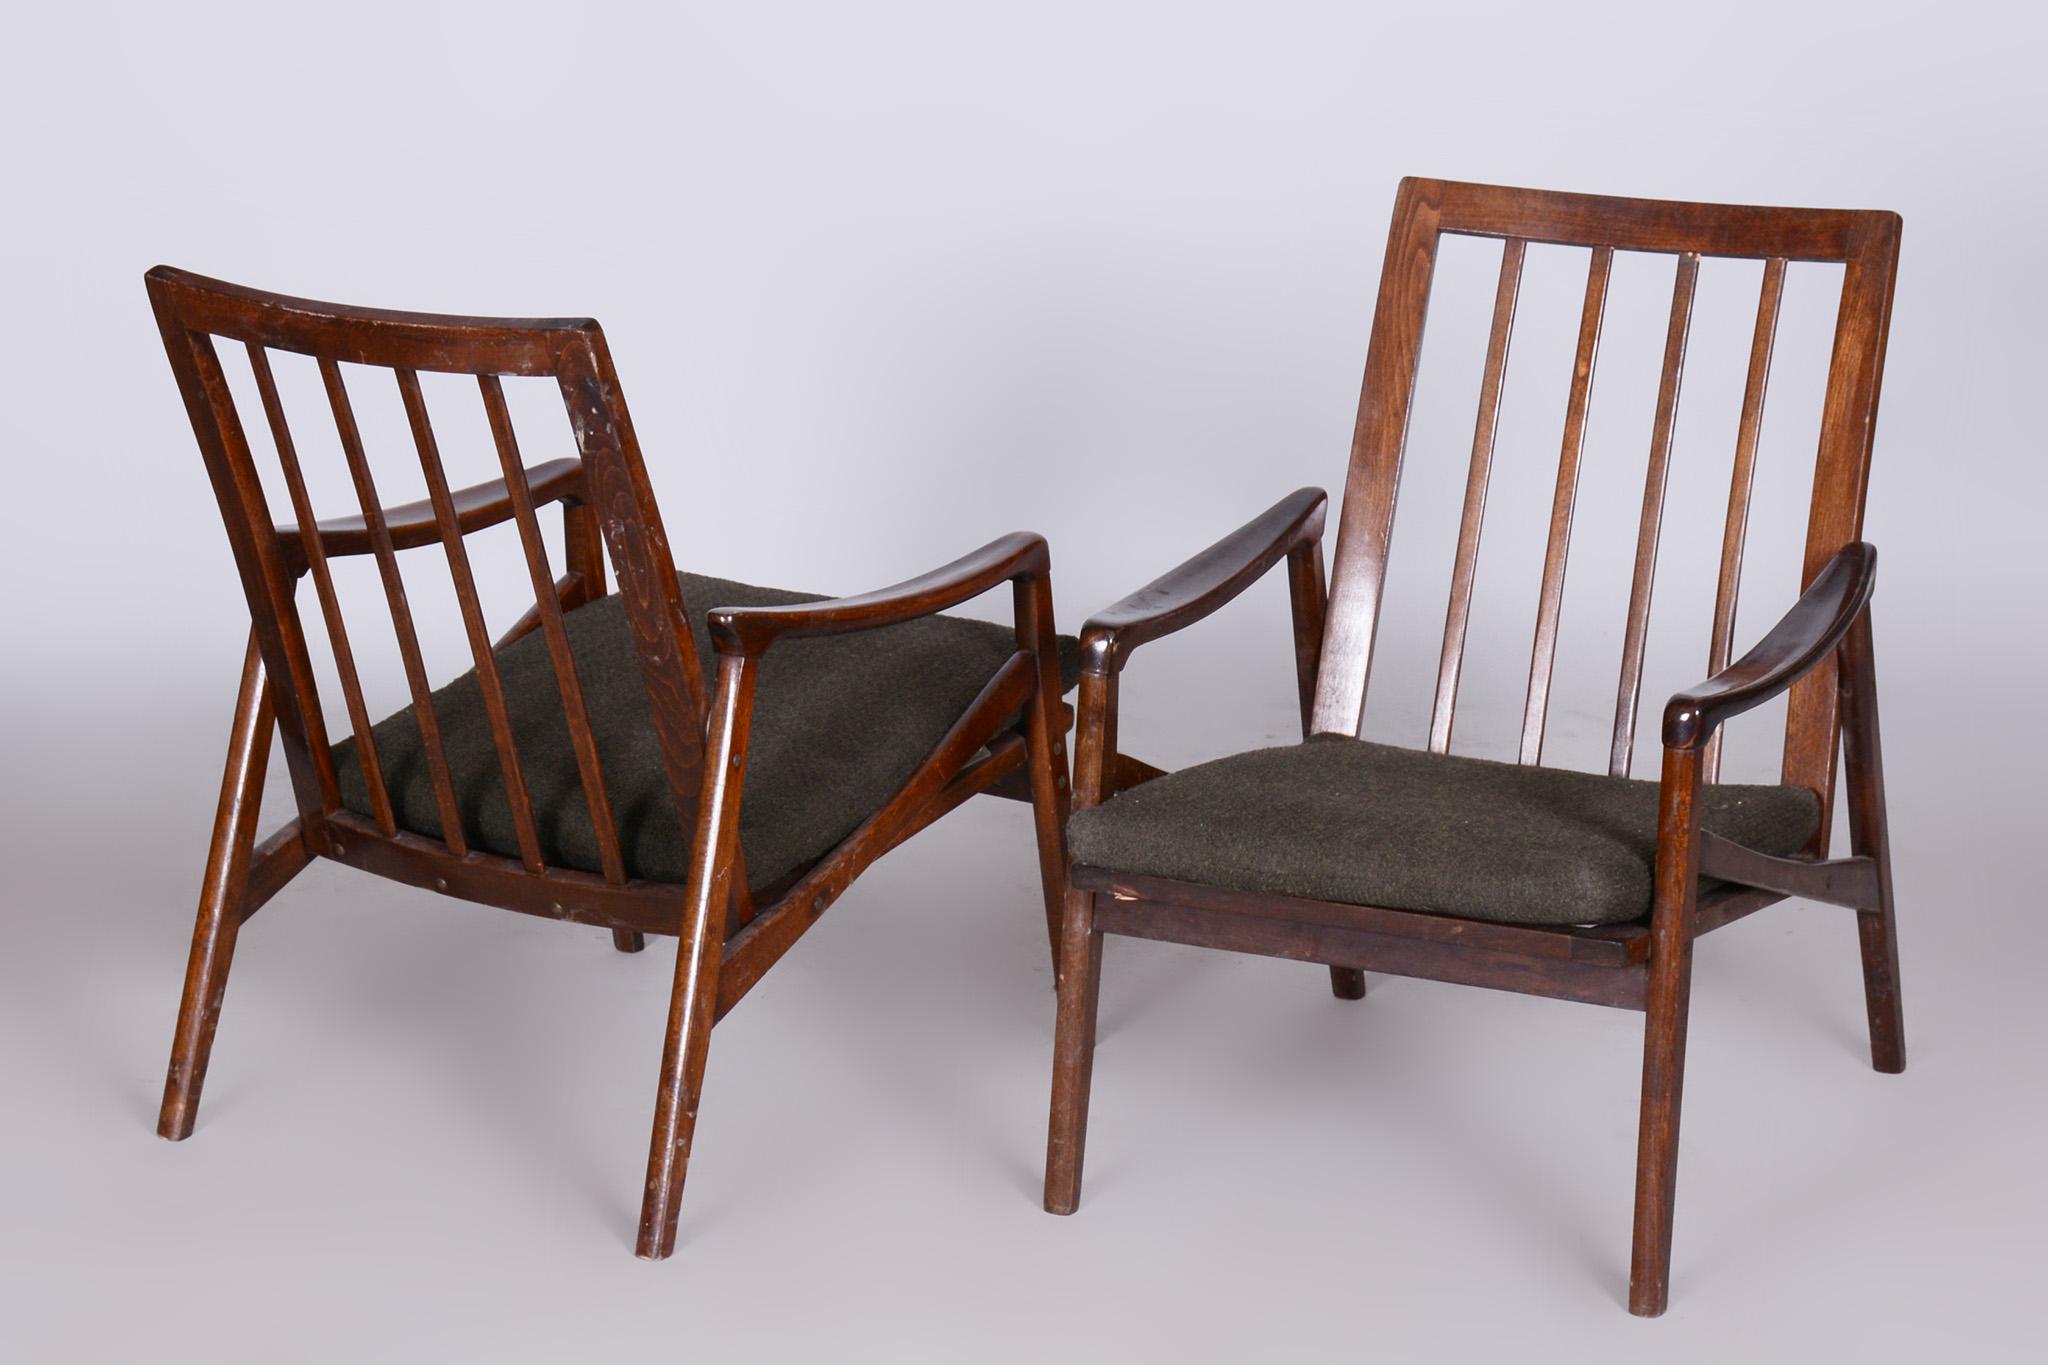 Pair of Mid-Century Armchairs, Stained Beech, Revived Polish, Czechia, 1960s For Sale 4